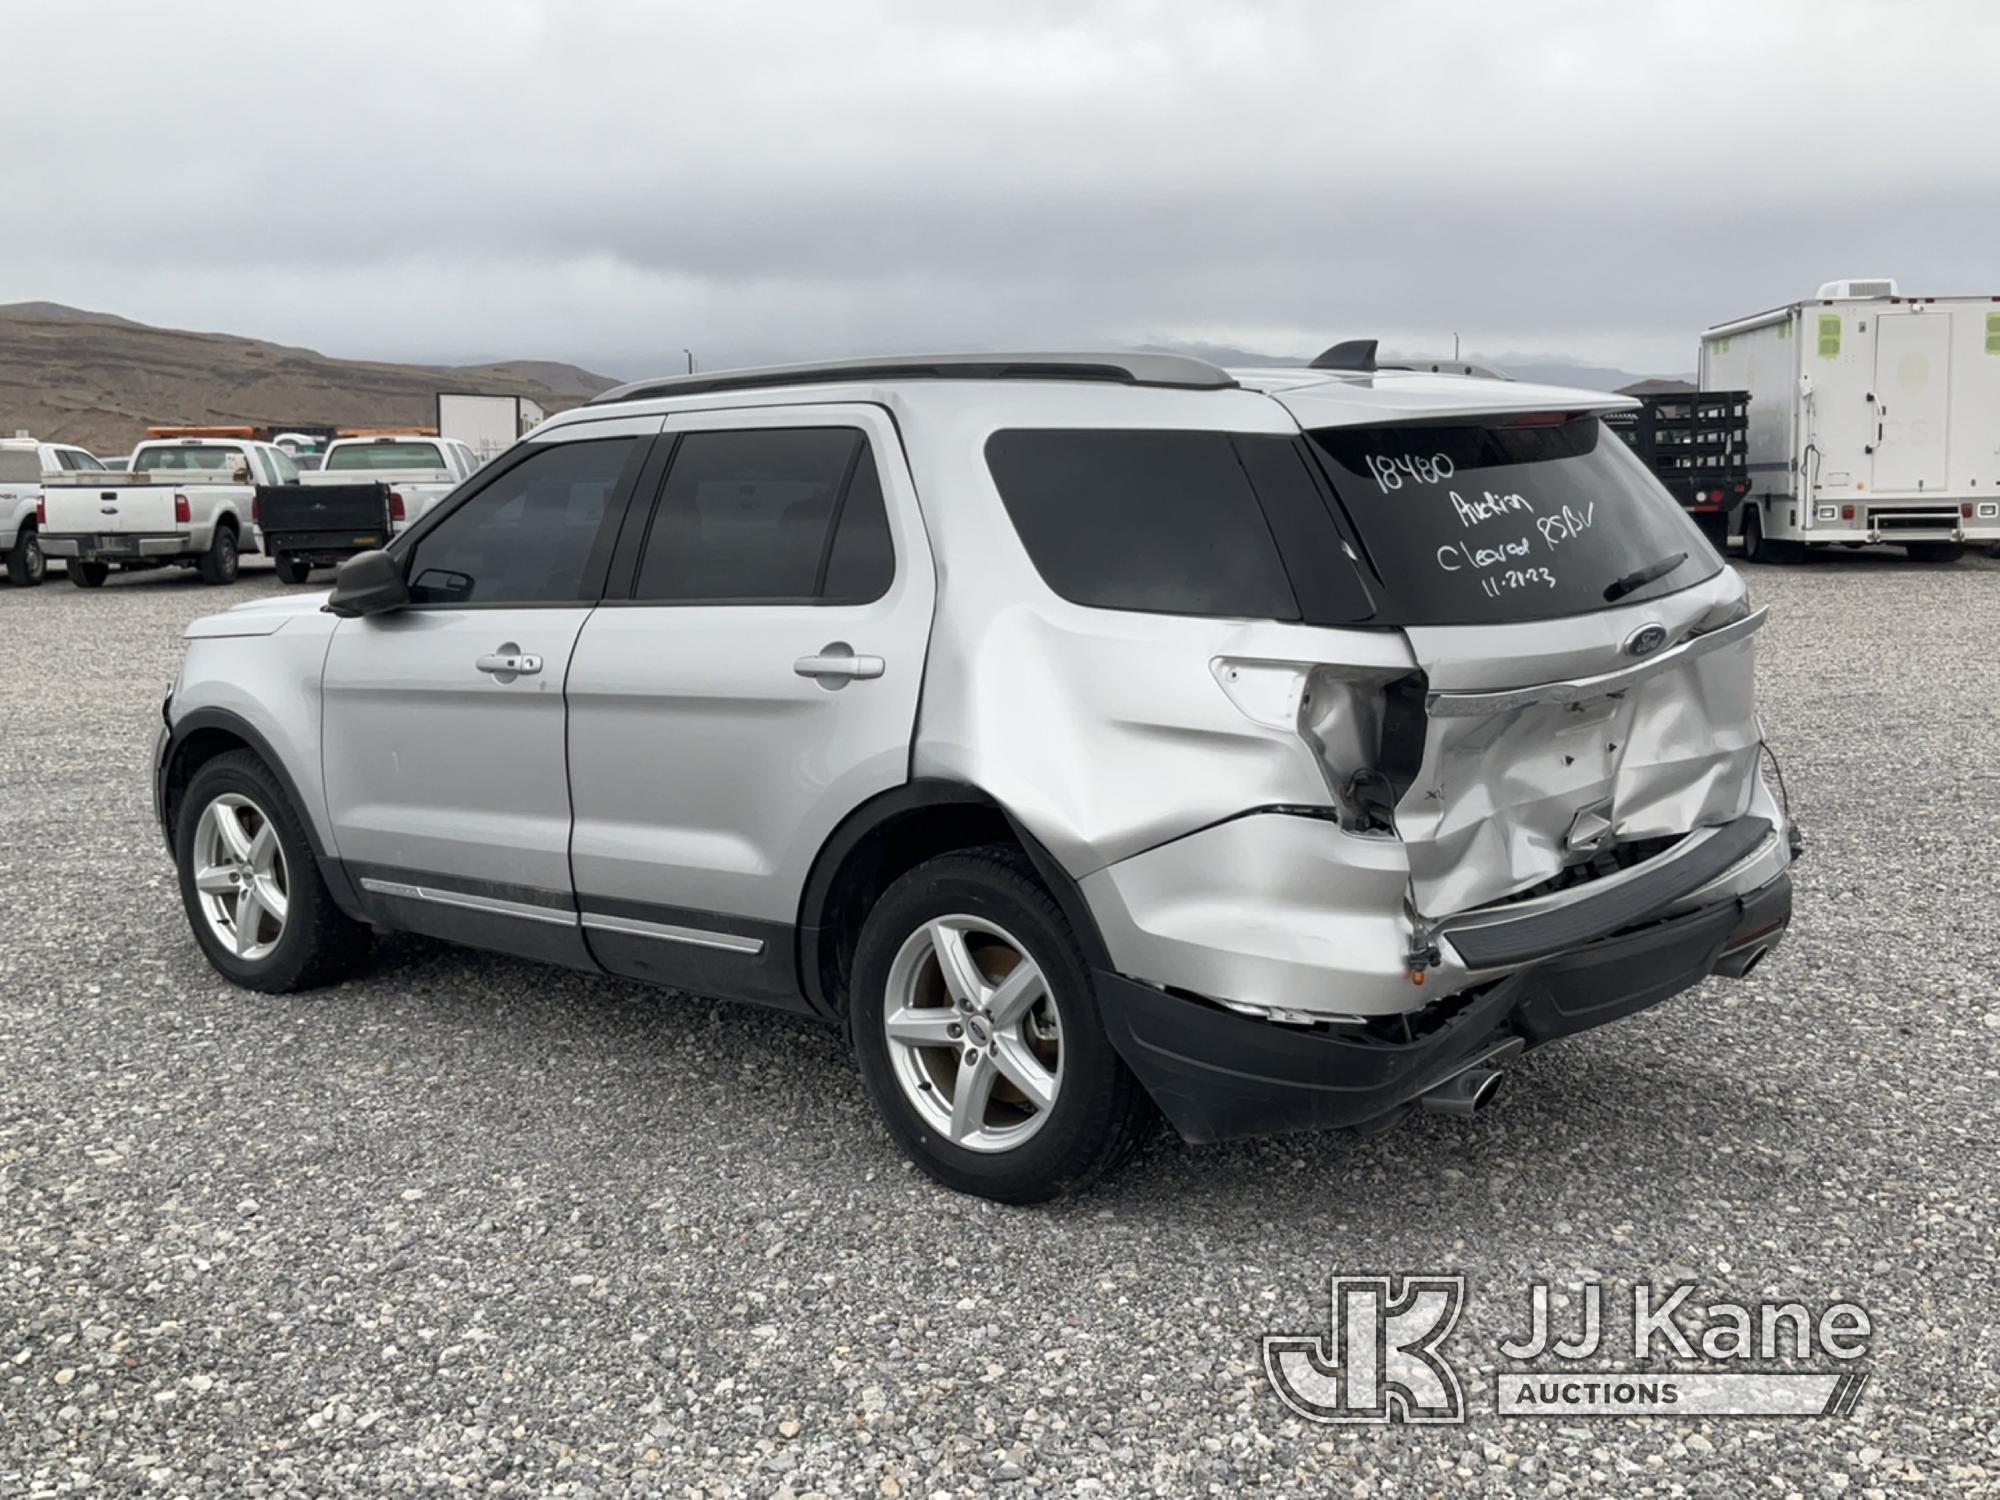 (Las Vegas, NV) 2018 Ford Explorer Wrecked, Missing Parts, Towed In Jump To Star, Runs & Moves